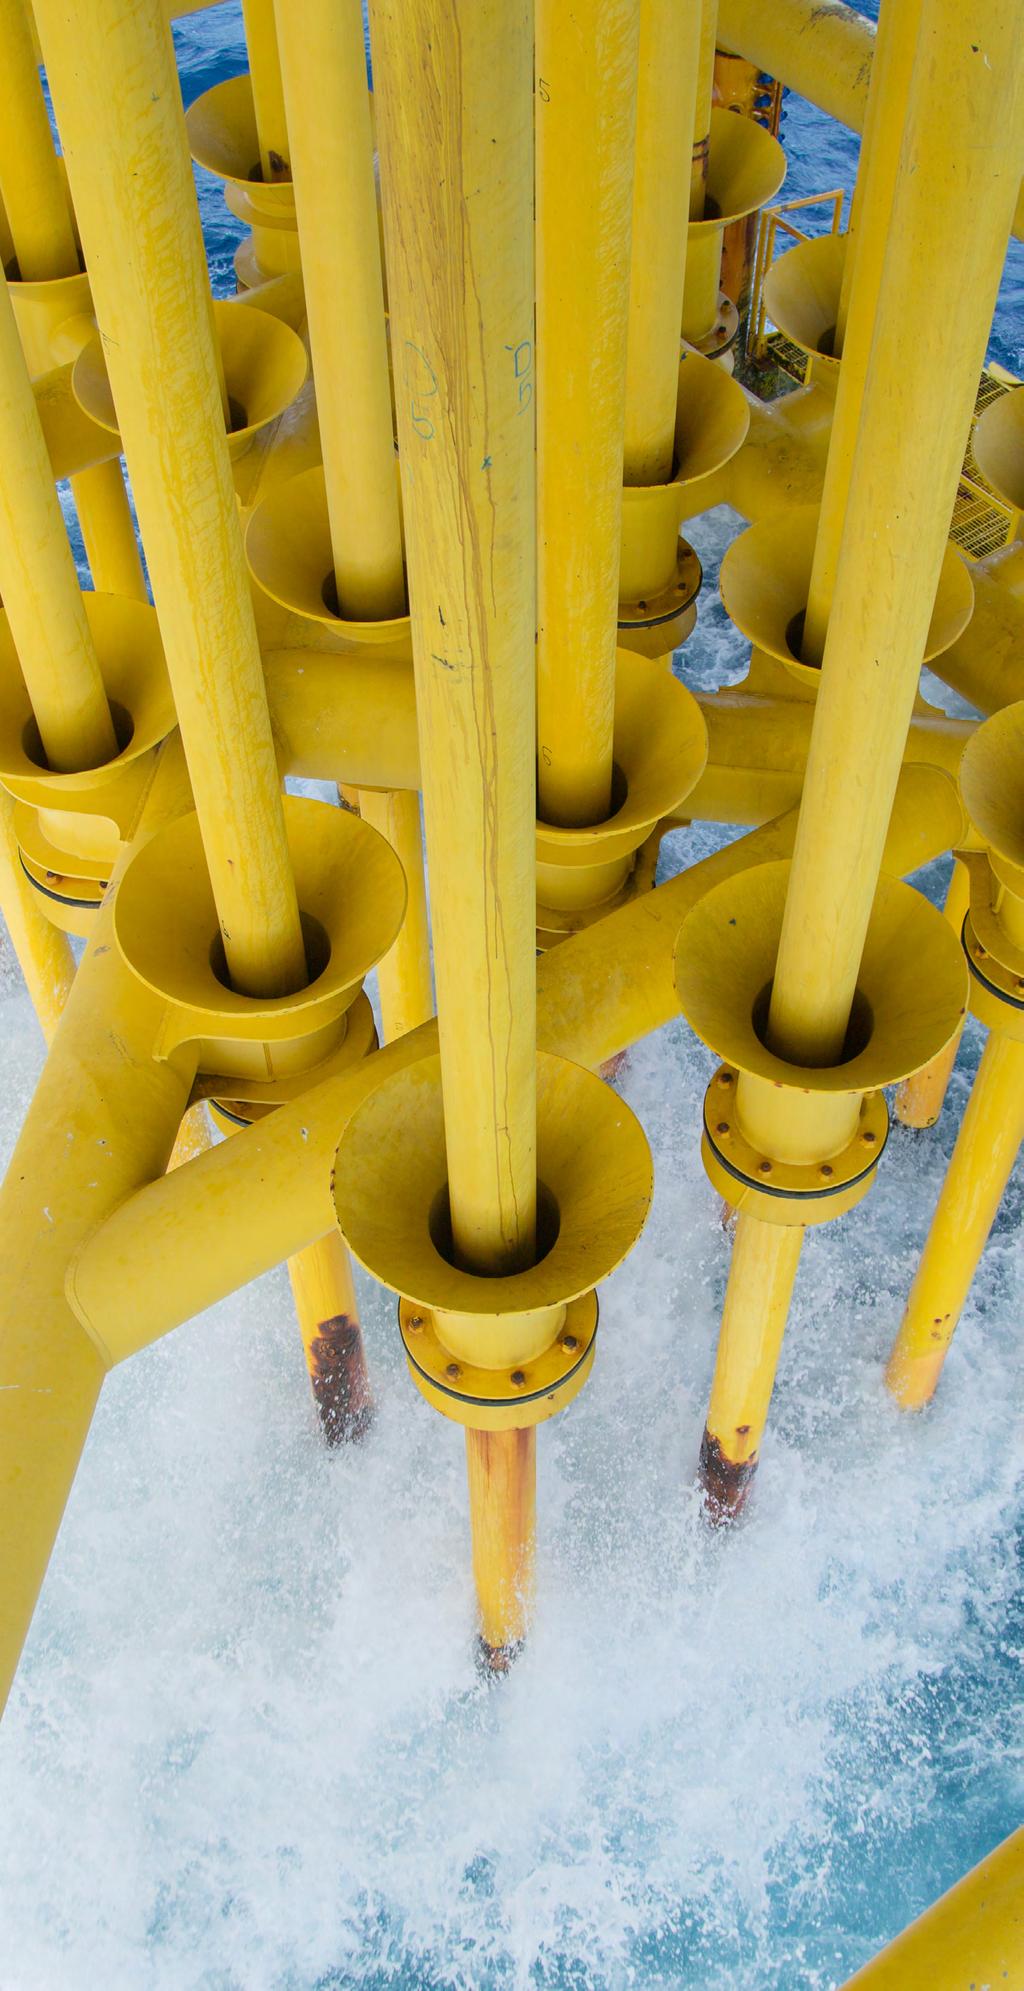 WELLHEAD AND RISER MONITORING Subsea wells have a limited fatigue life. For new wells, utilisation and fatigue damage data can be accumulated from day one to reduce future uncertainty.